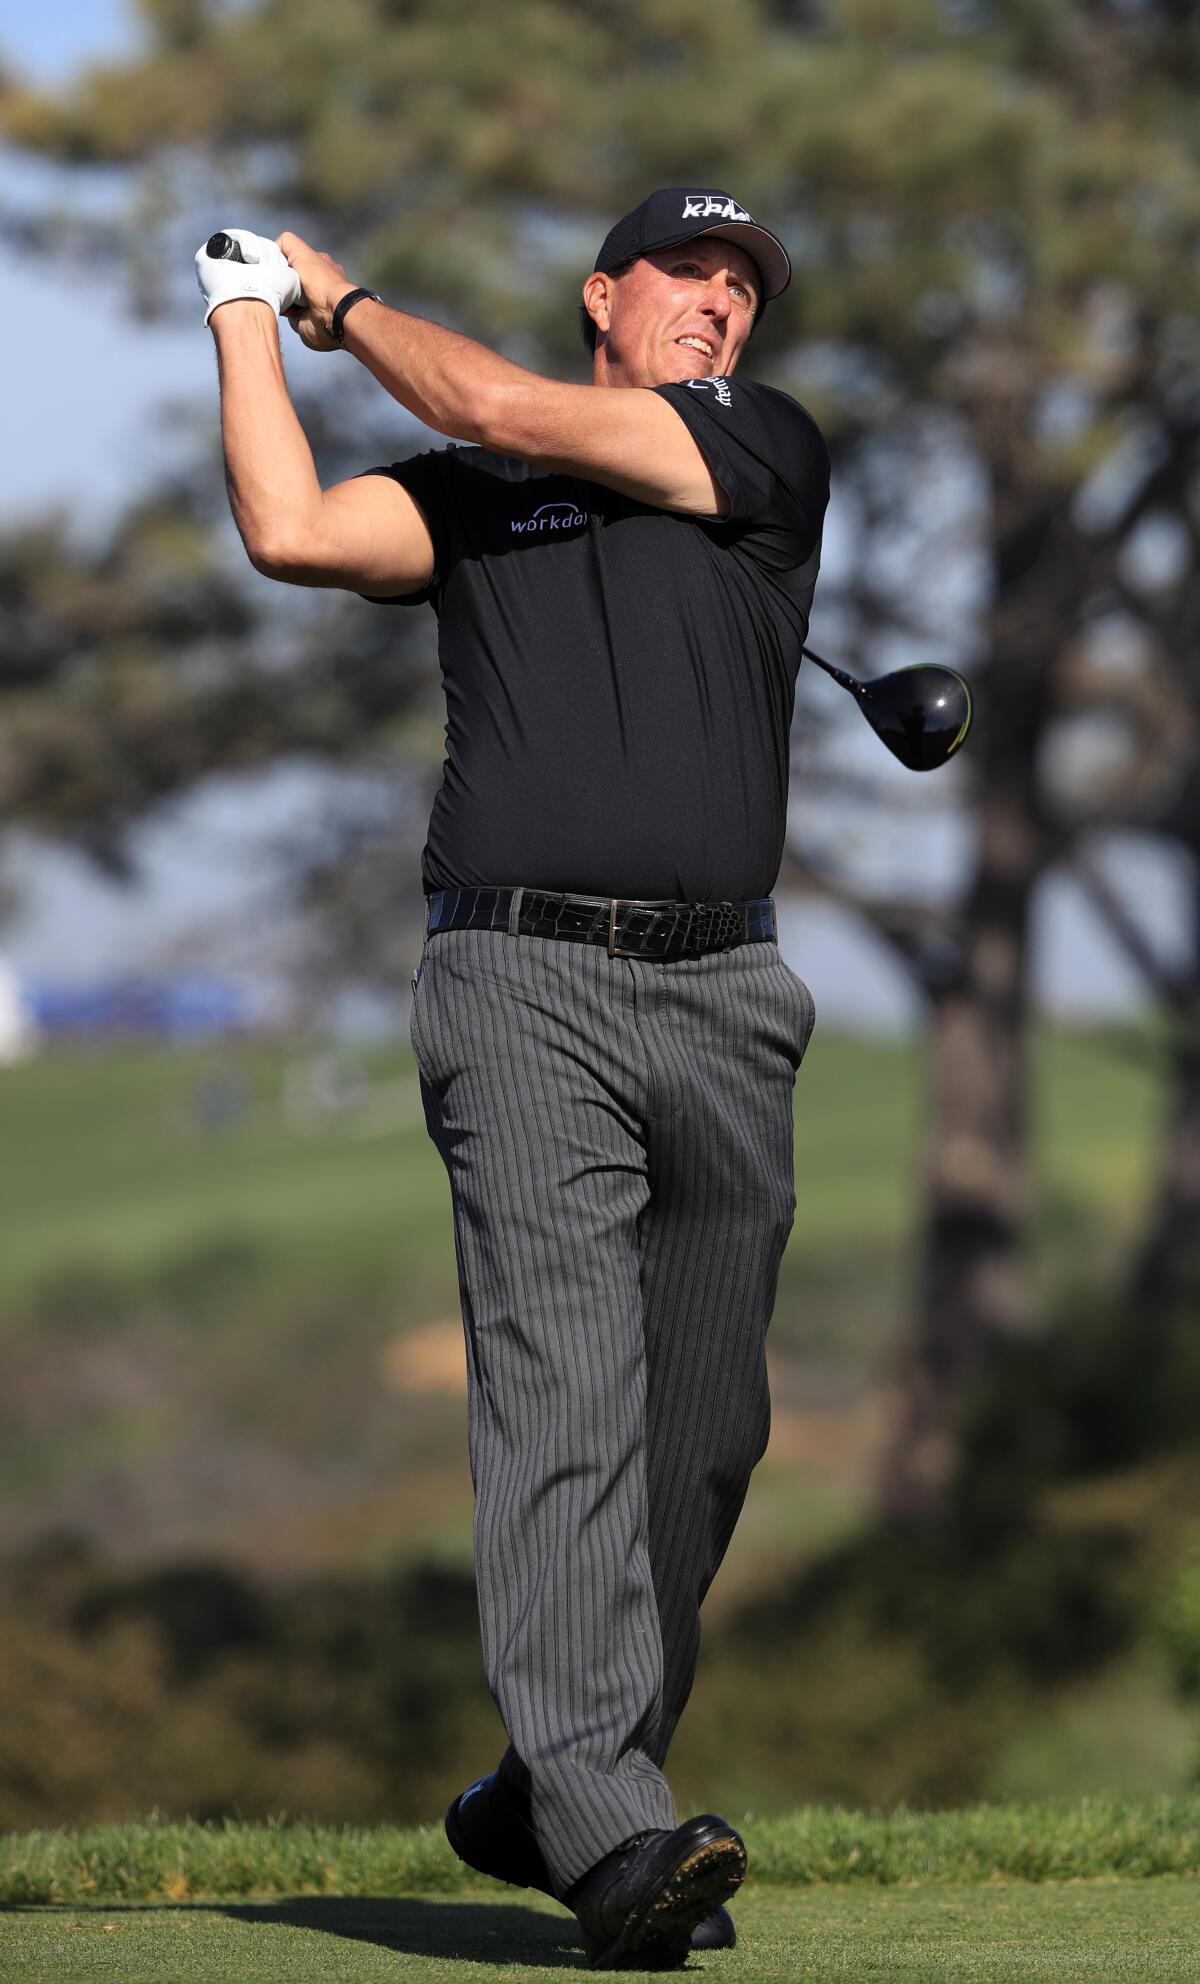 Three-time Masters champion Phil Mickelson is committed to play in the Farmers Insurance Open Jan. 28-31 in La Jolla.